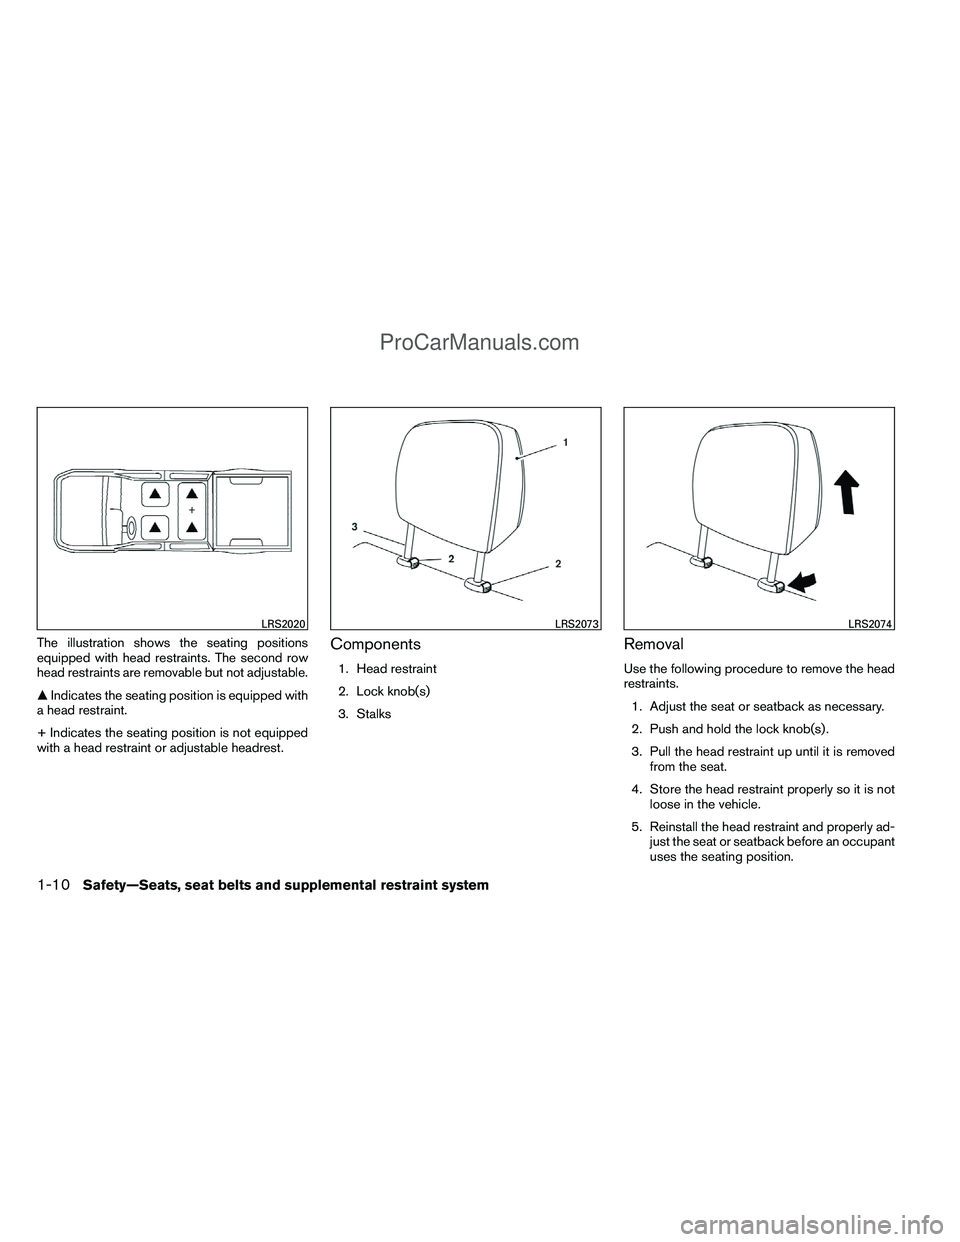 NISSAN TITAN 2012 Owners Manual The illustration shows the seating positions
equipped with head restraints. The second row
head restraints are removable but not adjustable.
Indicates the seating position is equipped with
a head res